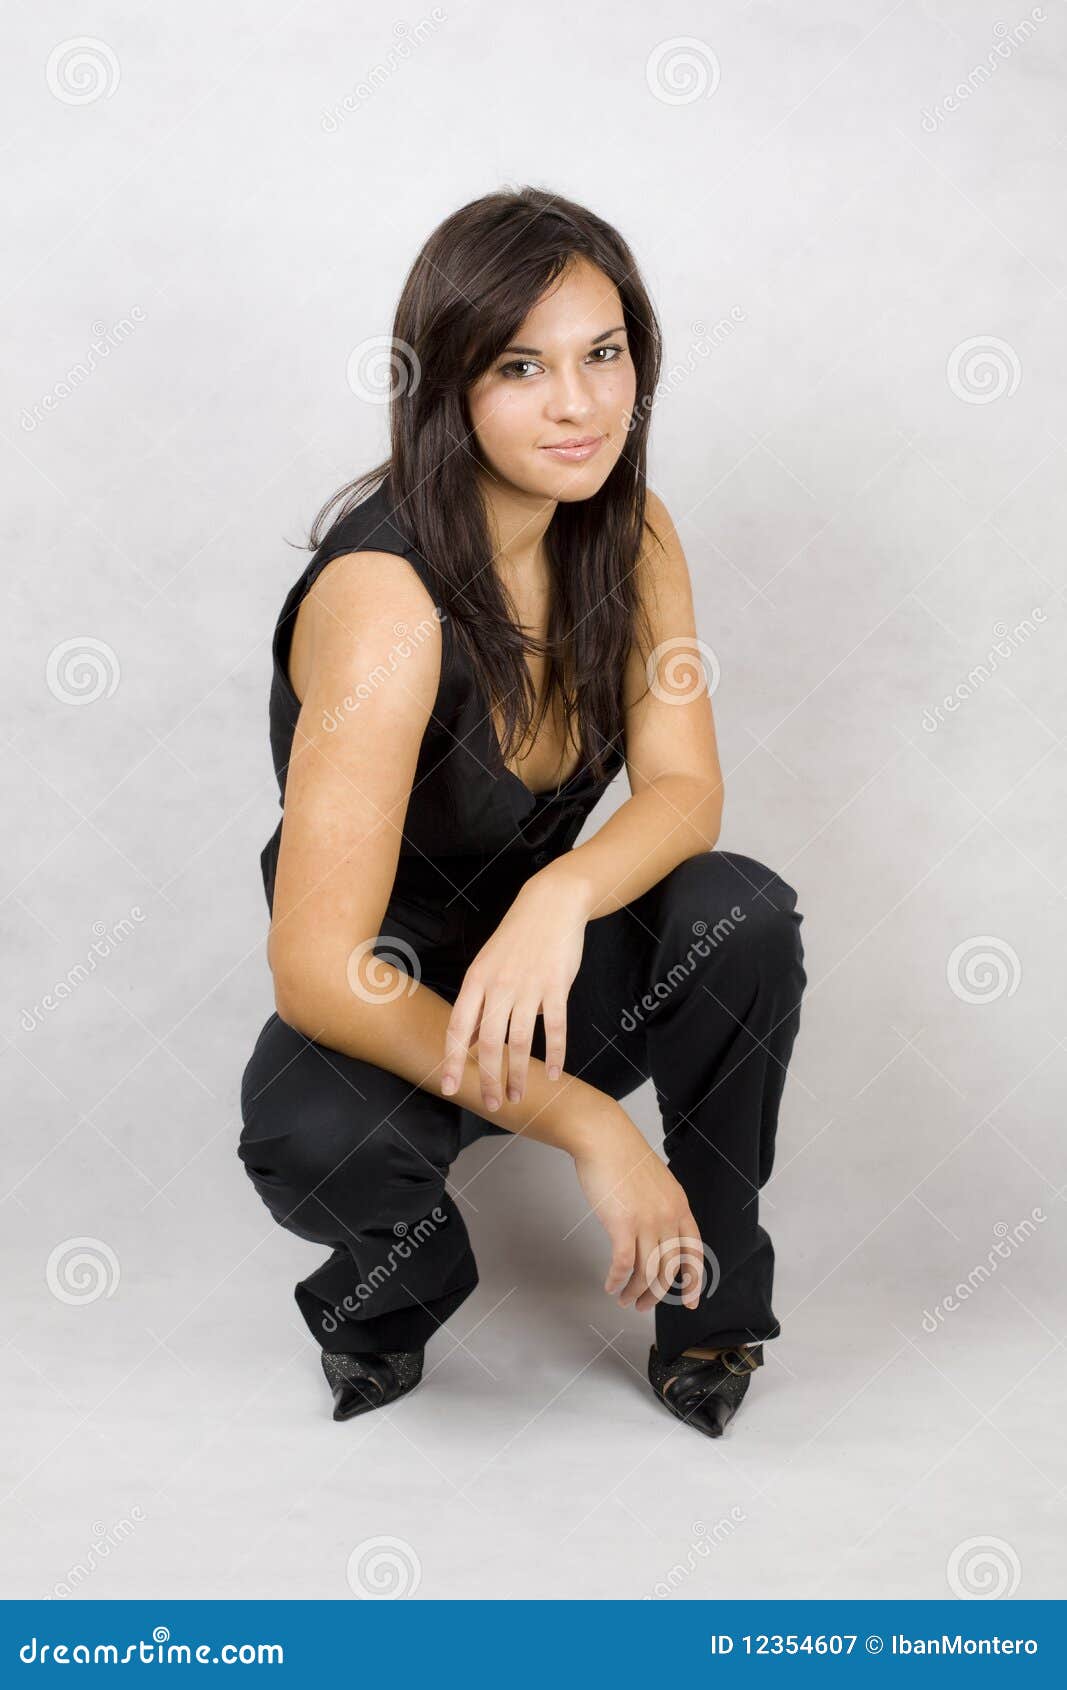 Gorgeous young girl stock image. Image of posing, attractive - 12354607